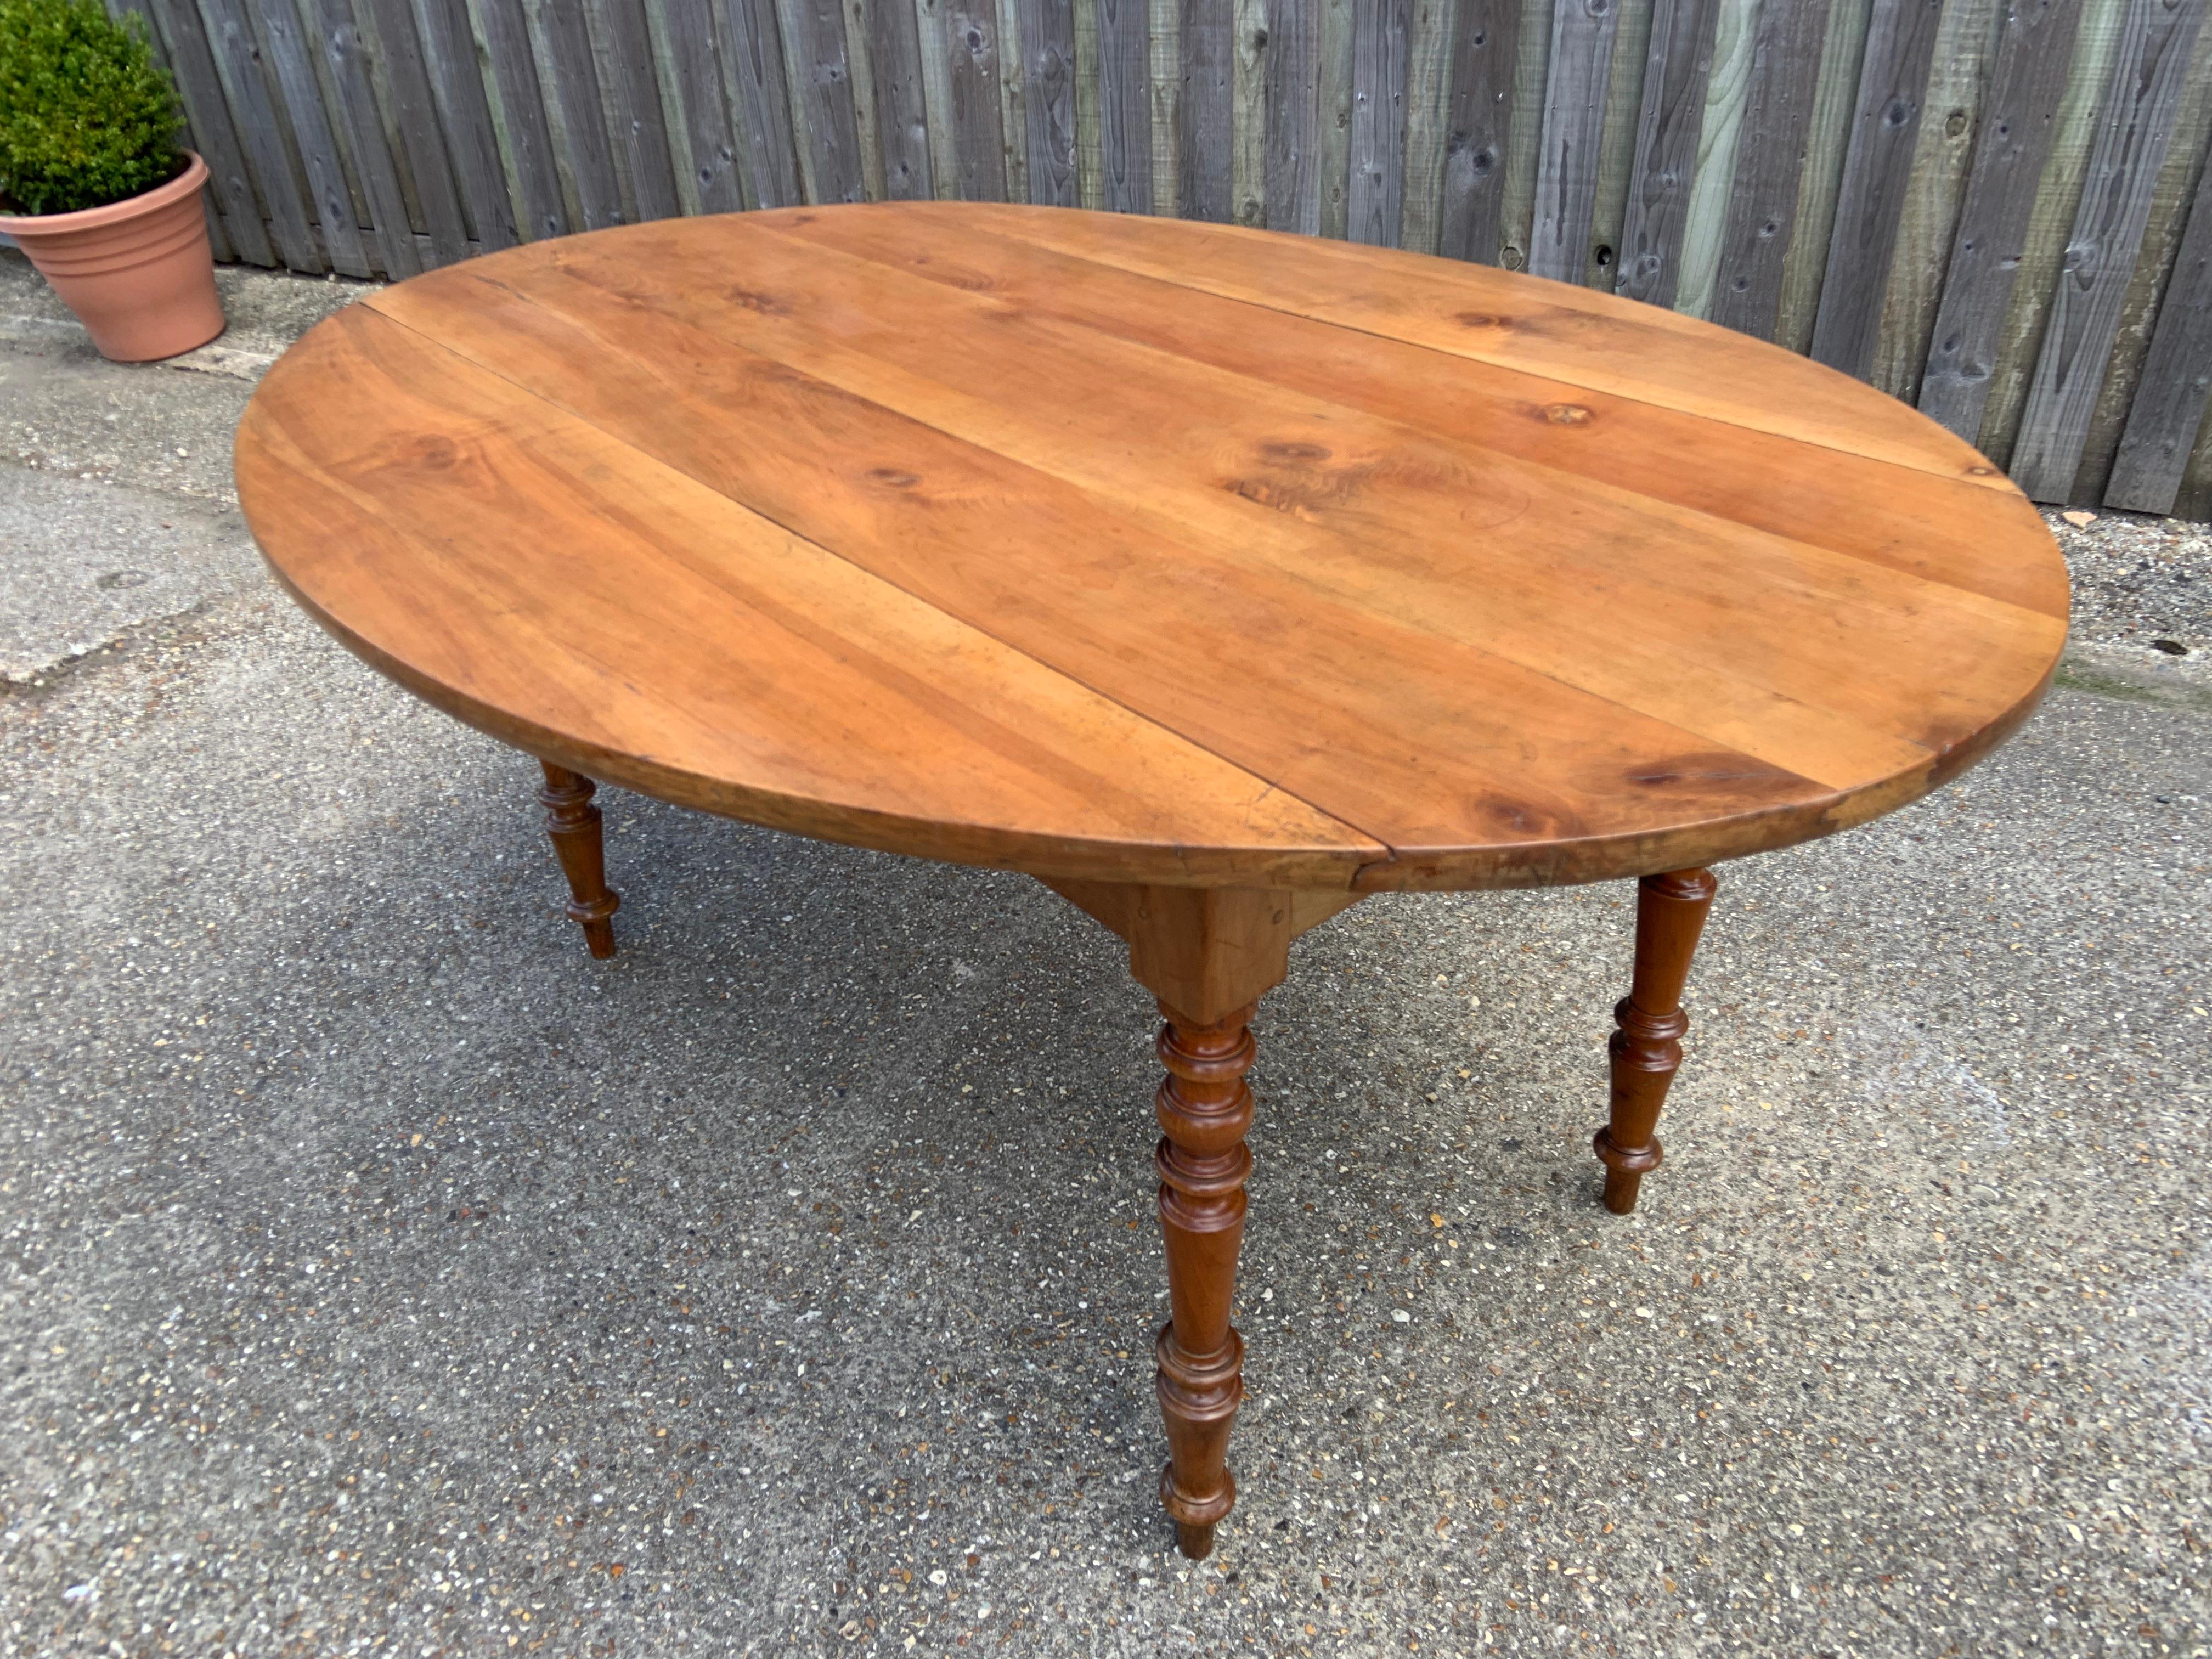 French Provincial Antique Cherry Tapered Leg Oval Drop Leaf Table For Sale